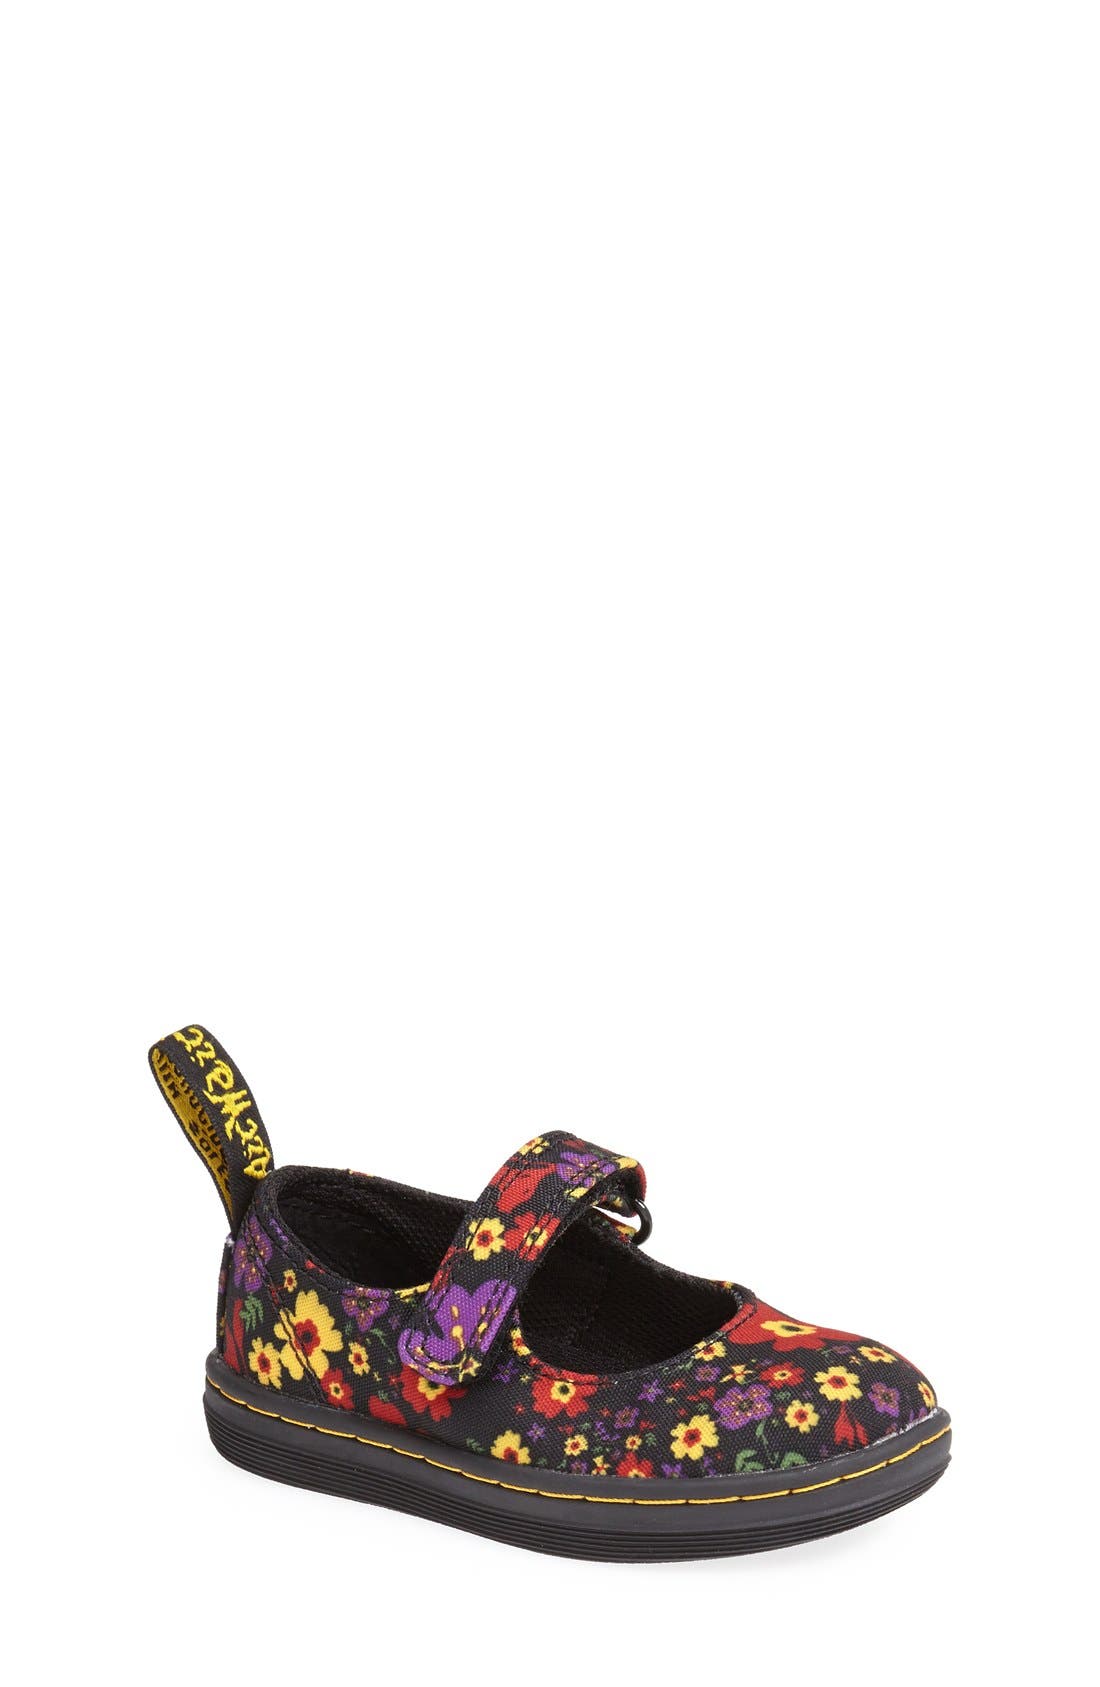 doc martens canvas mary janes